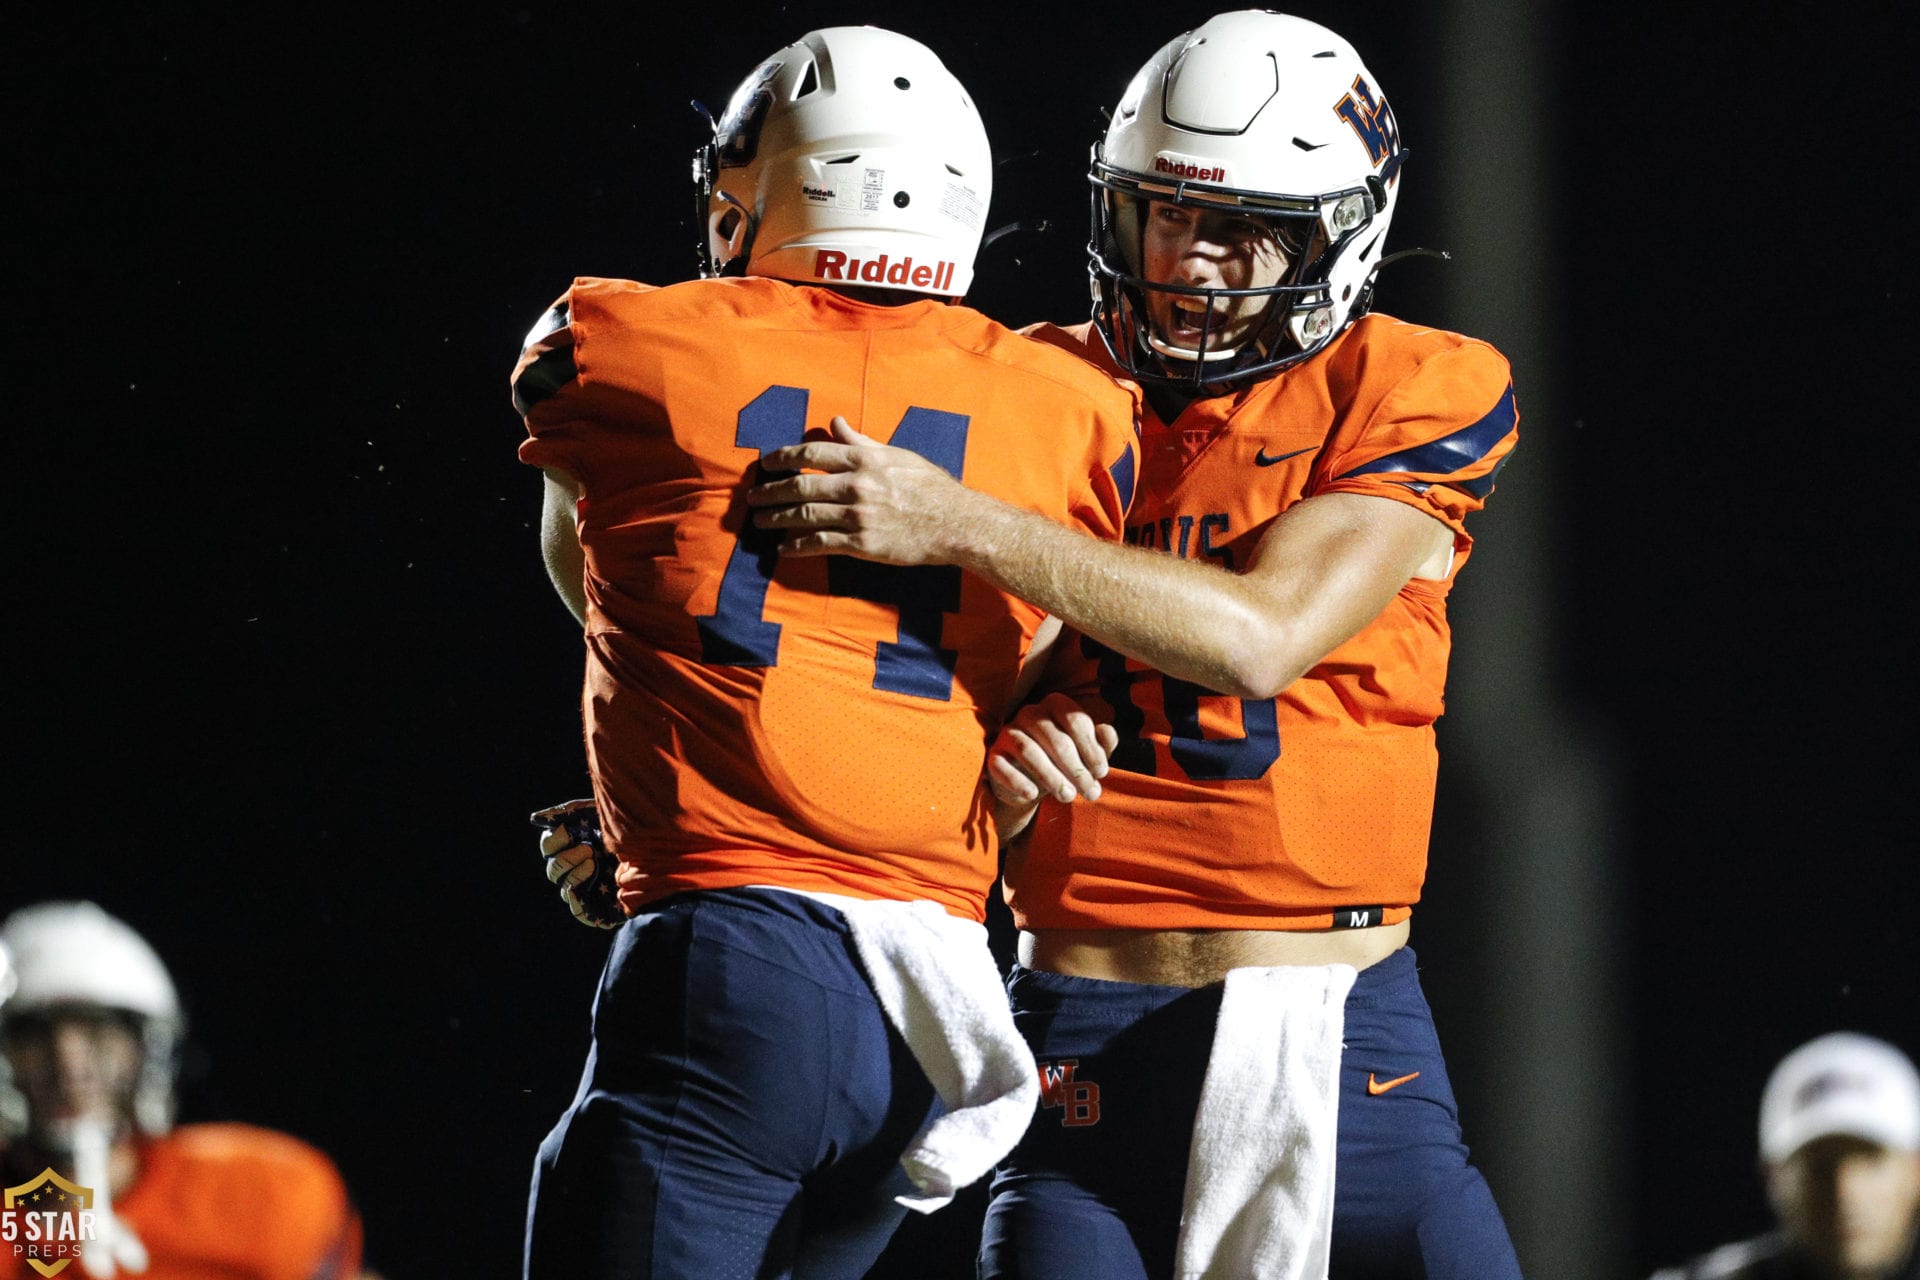 DING, DING: William Blount football rallies past Heritage late to take Battle of the Bell for a